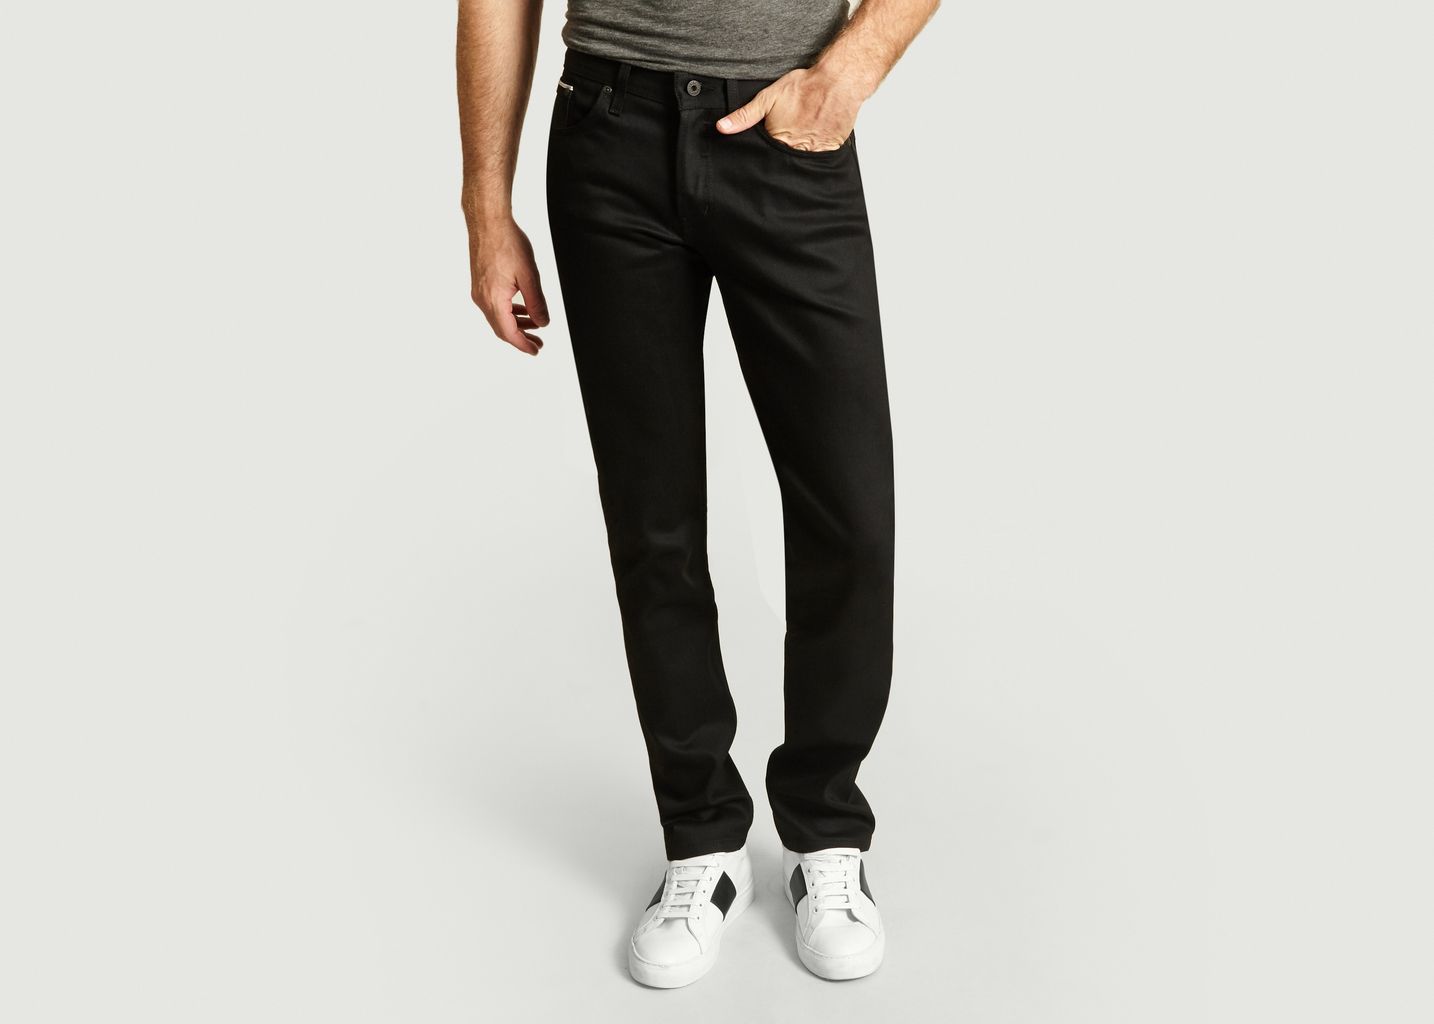 Naked & Famous Weirdguy Guy Jeans Cobra Stretch